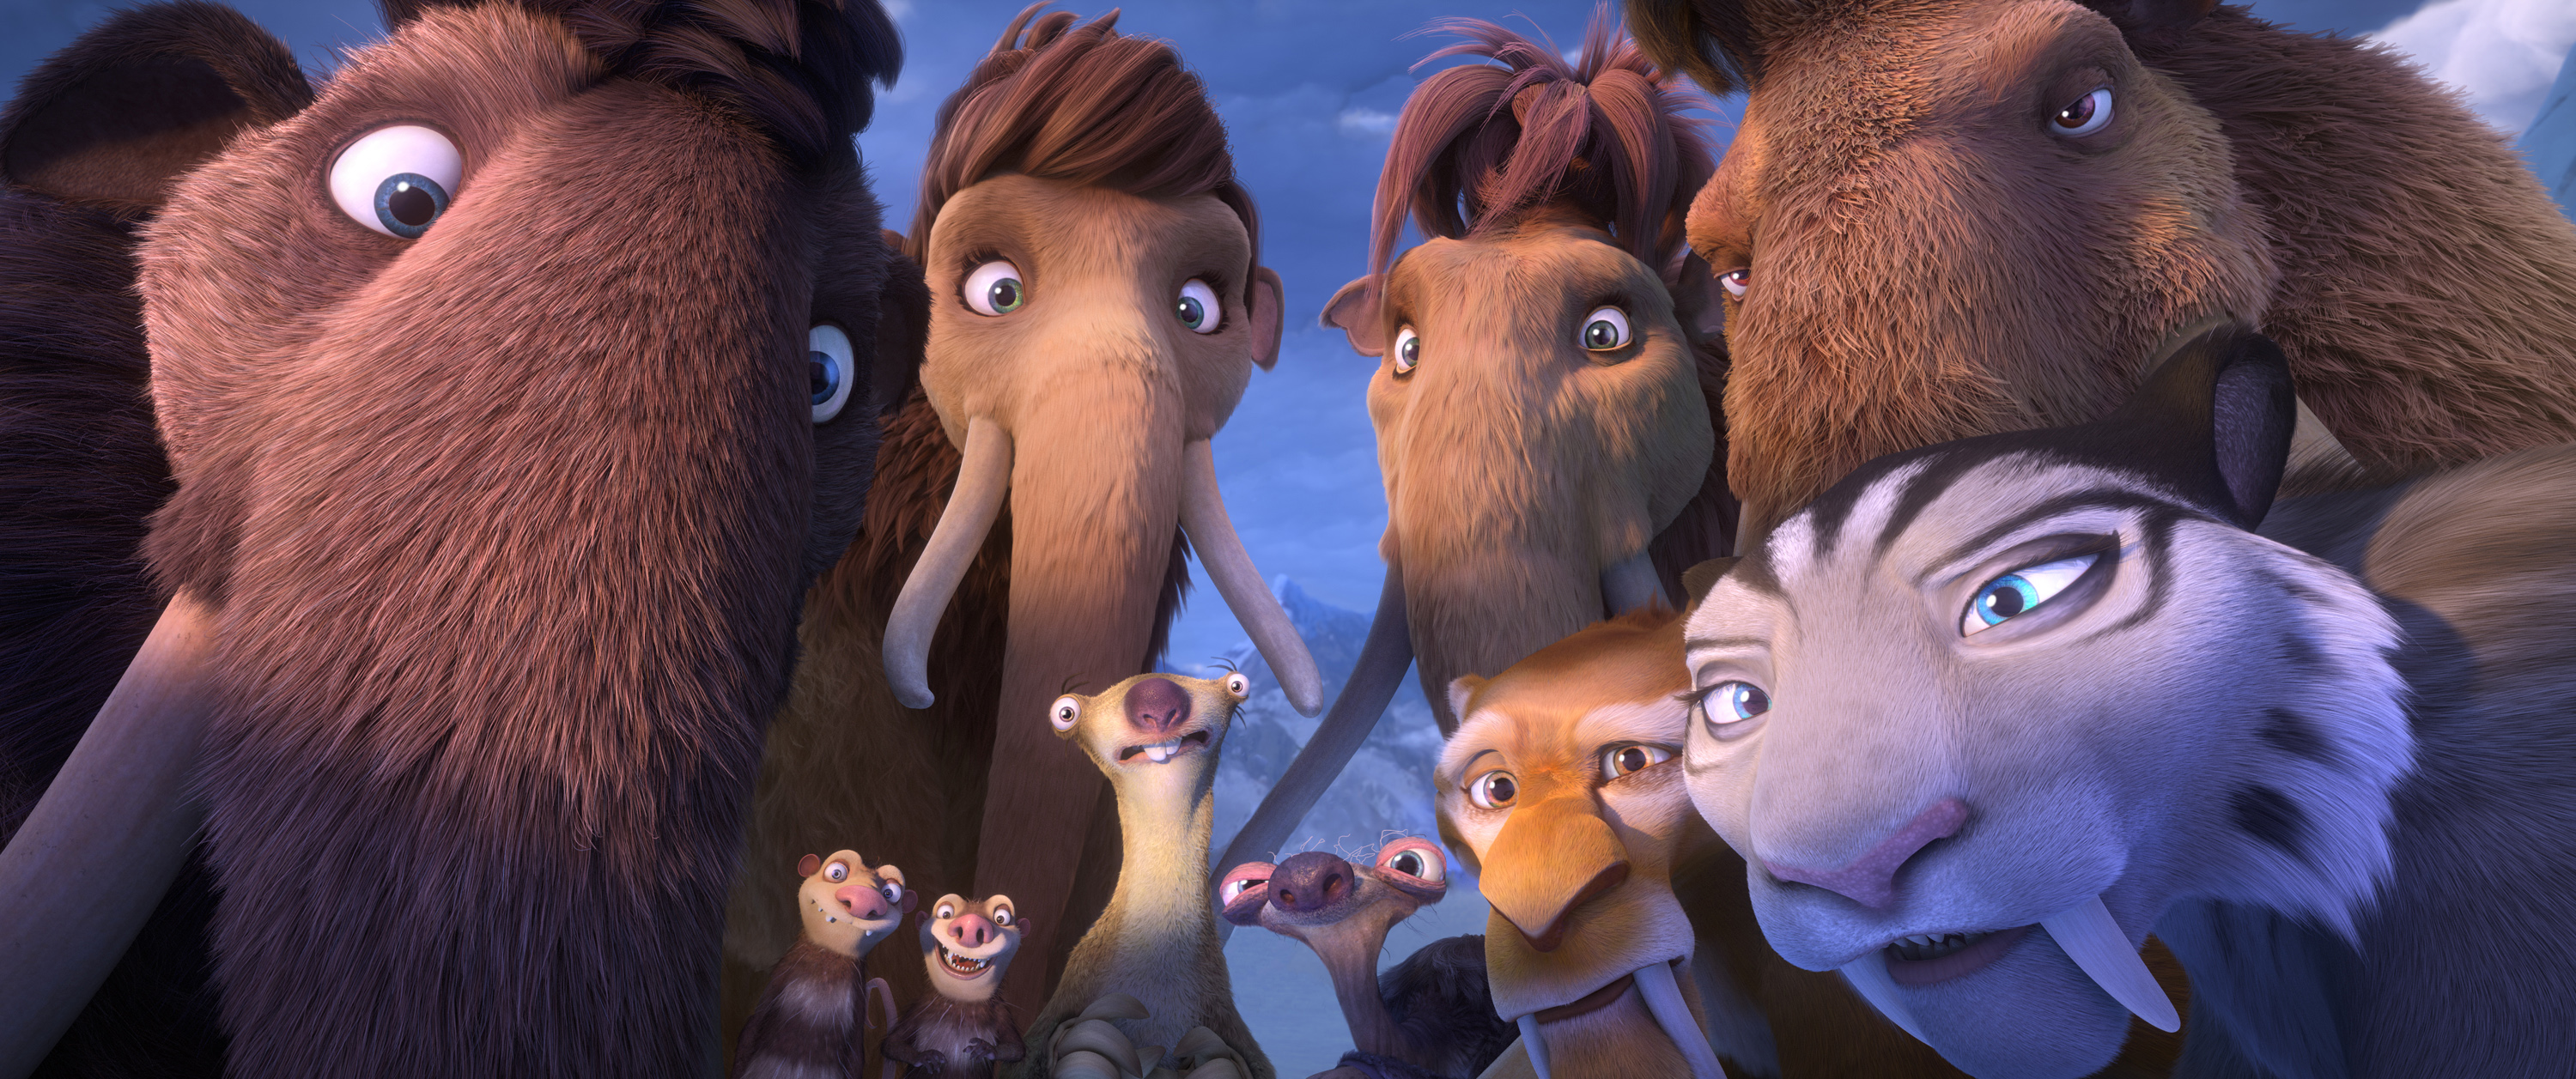 Win A Family Four Pack To The Advance Screening Of ICE AGE COLLISION